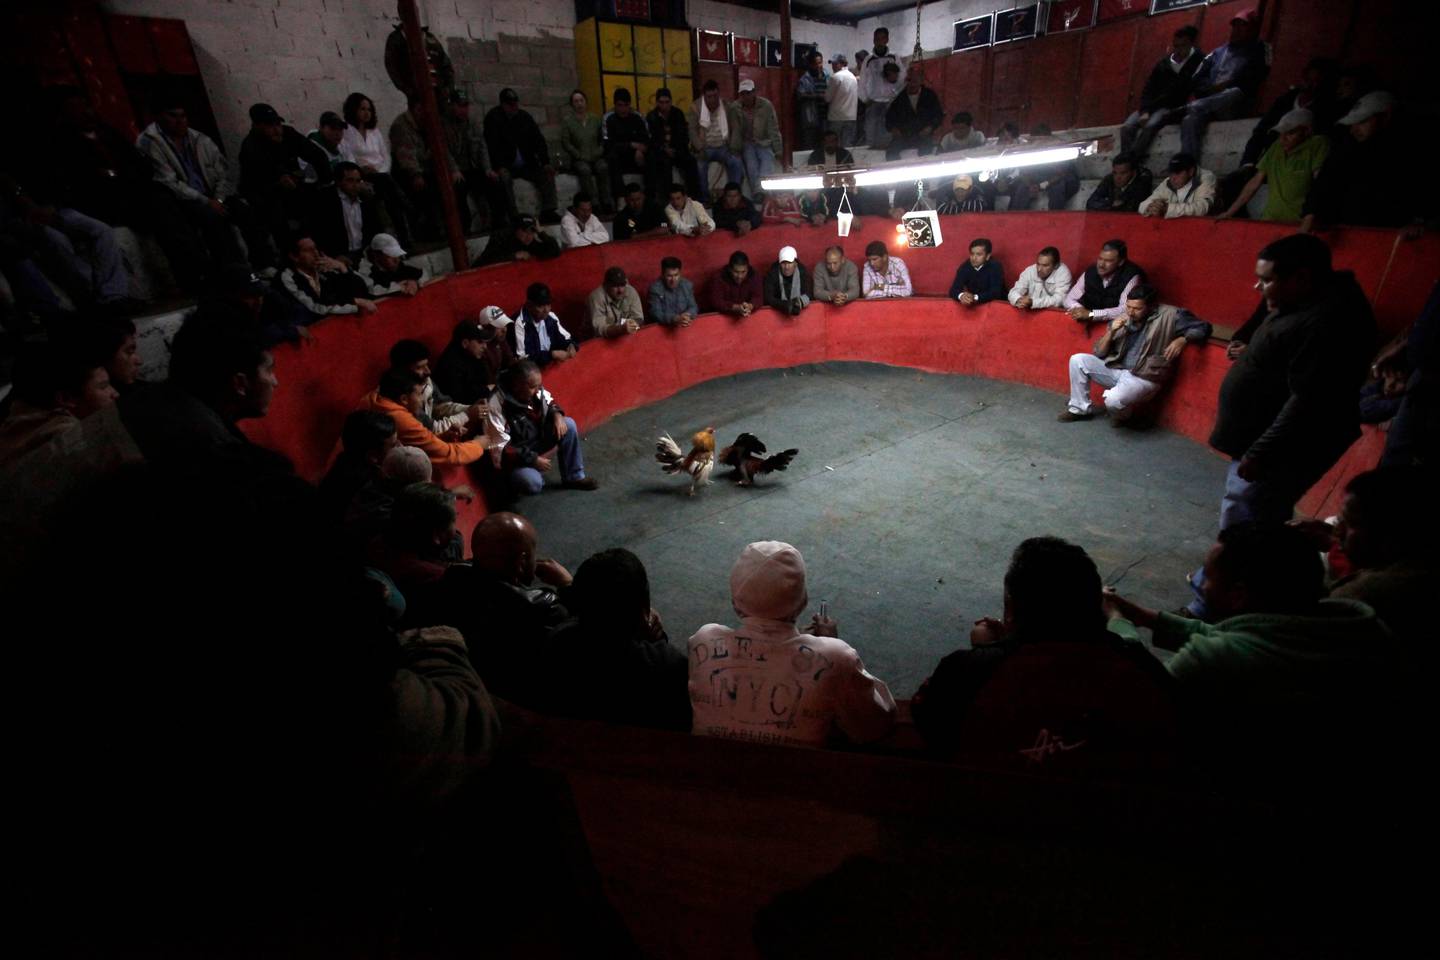 In this Feb. 11, 2011photo, people gather at the Pura Sangre cockfighting ring to watch roosters fight in Quito, Ecuador.  Ecuador's President Rafael Correa has called a referendum asking Ecuadoreans to ban bullfighting, cockfighting and other pursuits where animals are killed for human entertainment, and could could come as soon as May. (AP Photo/Dolores Ochoa) / SCANPIX Code: 436